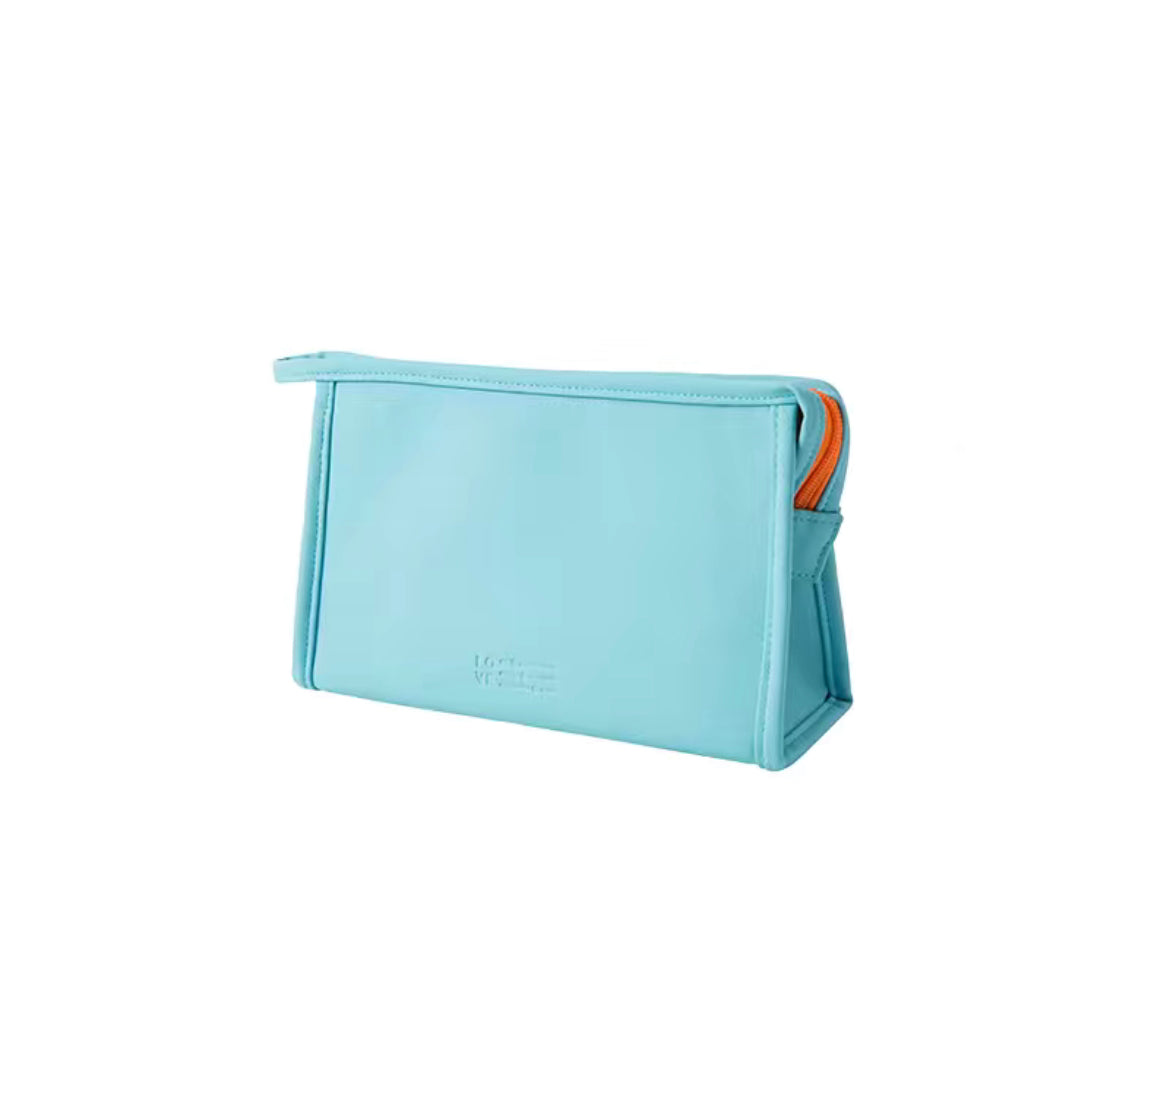 On Sale - LOVE Candy Color Cosmetic/Toiletry Bag